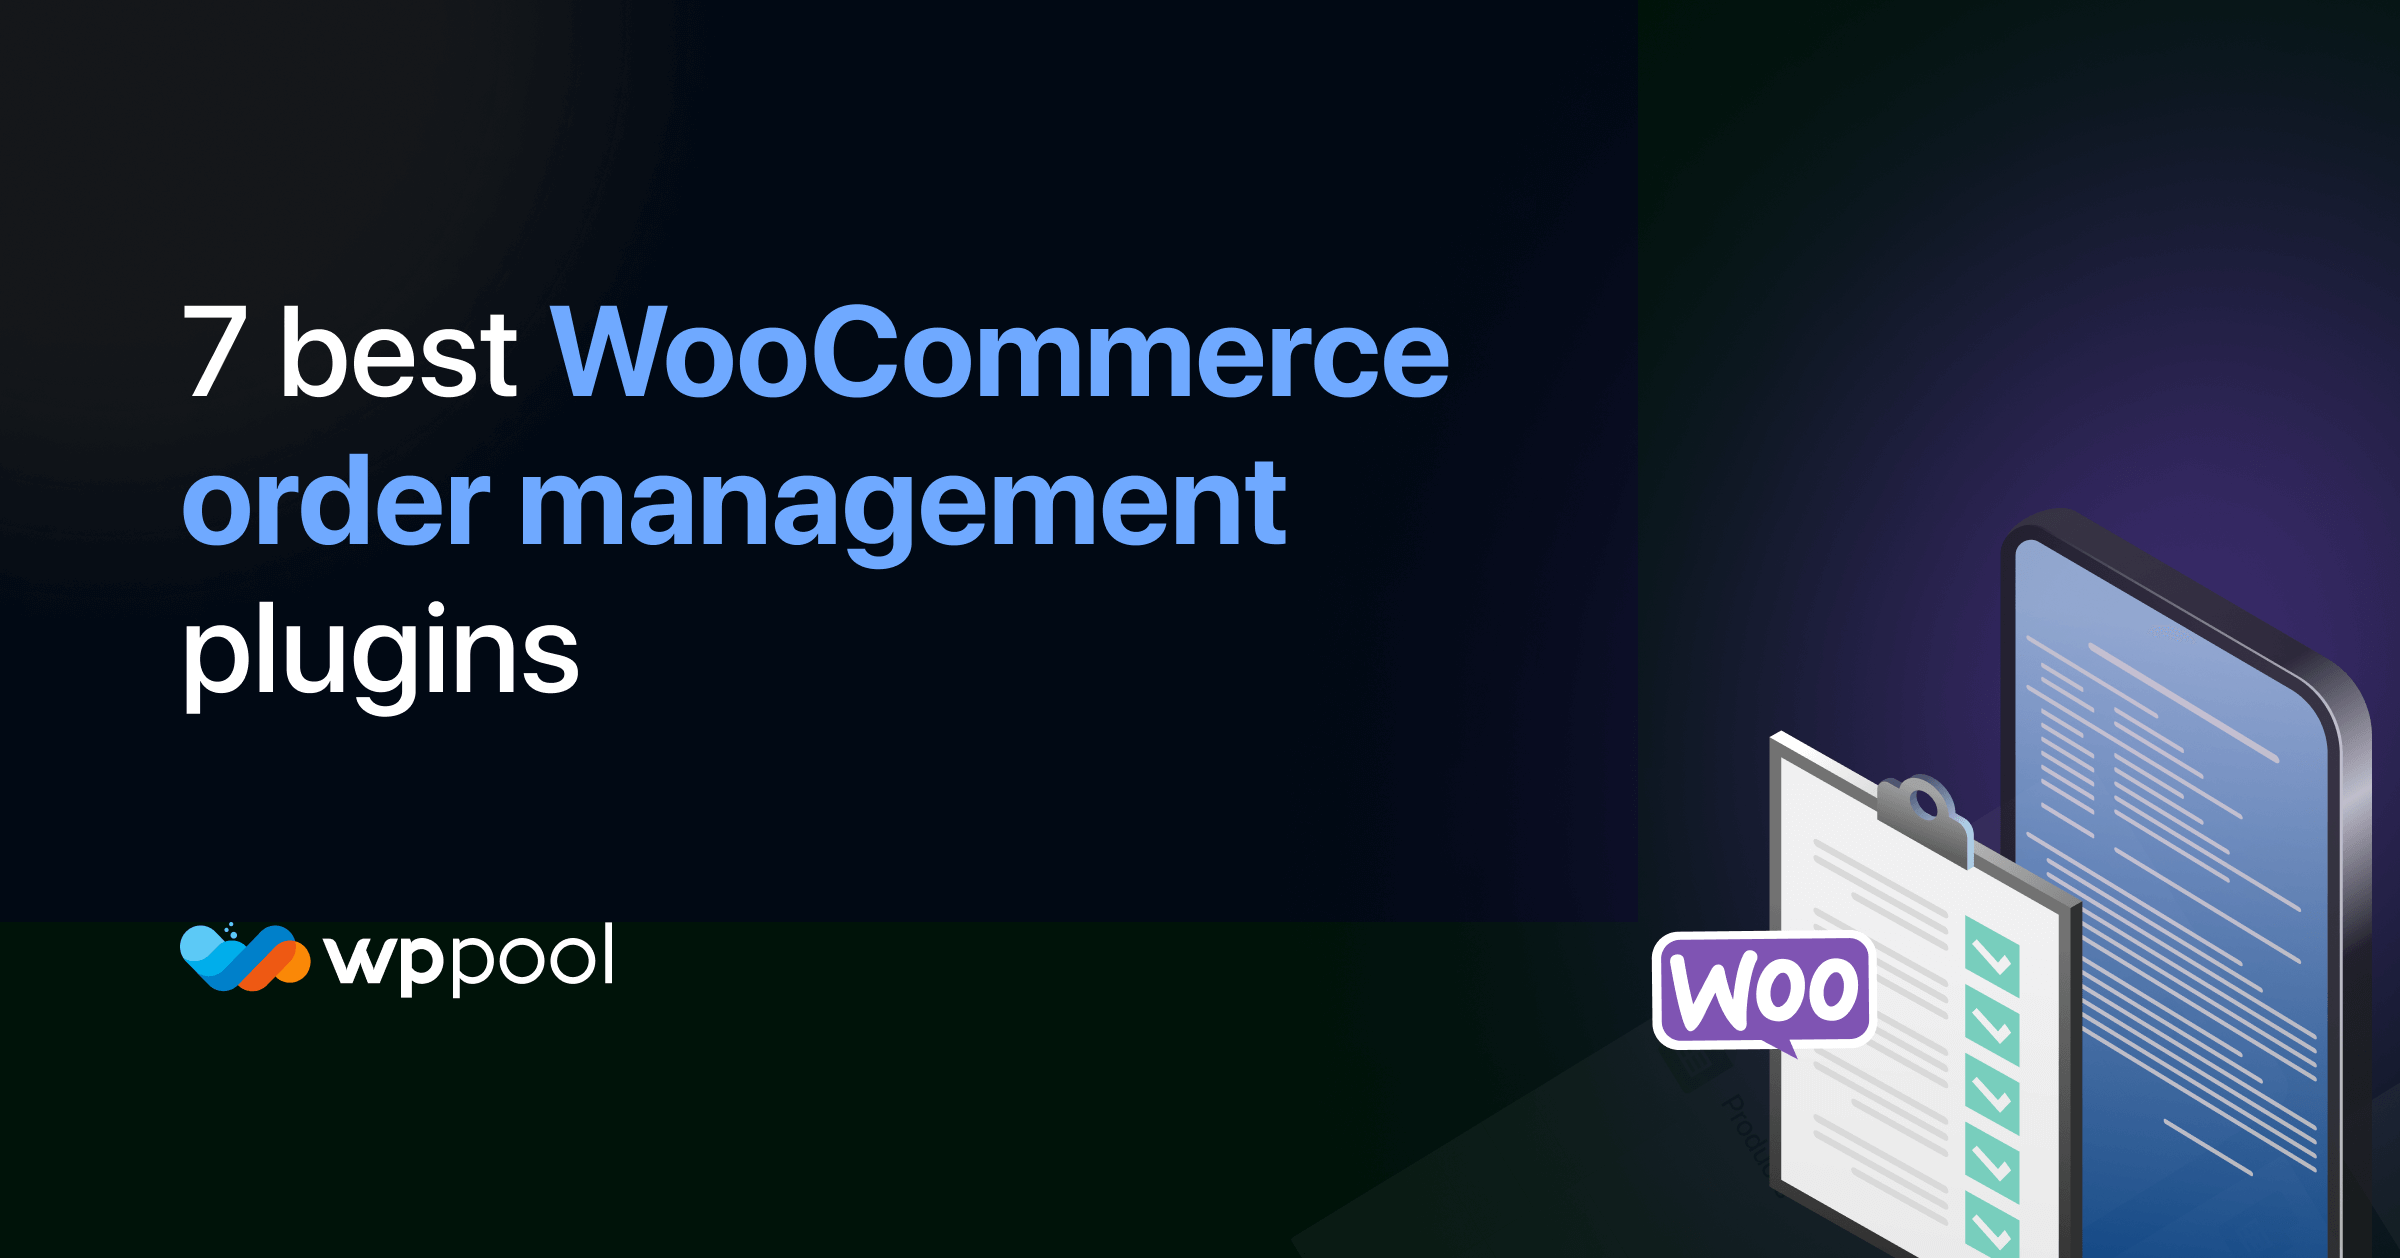 7 best WooCommerce order management plugins for your online store